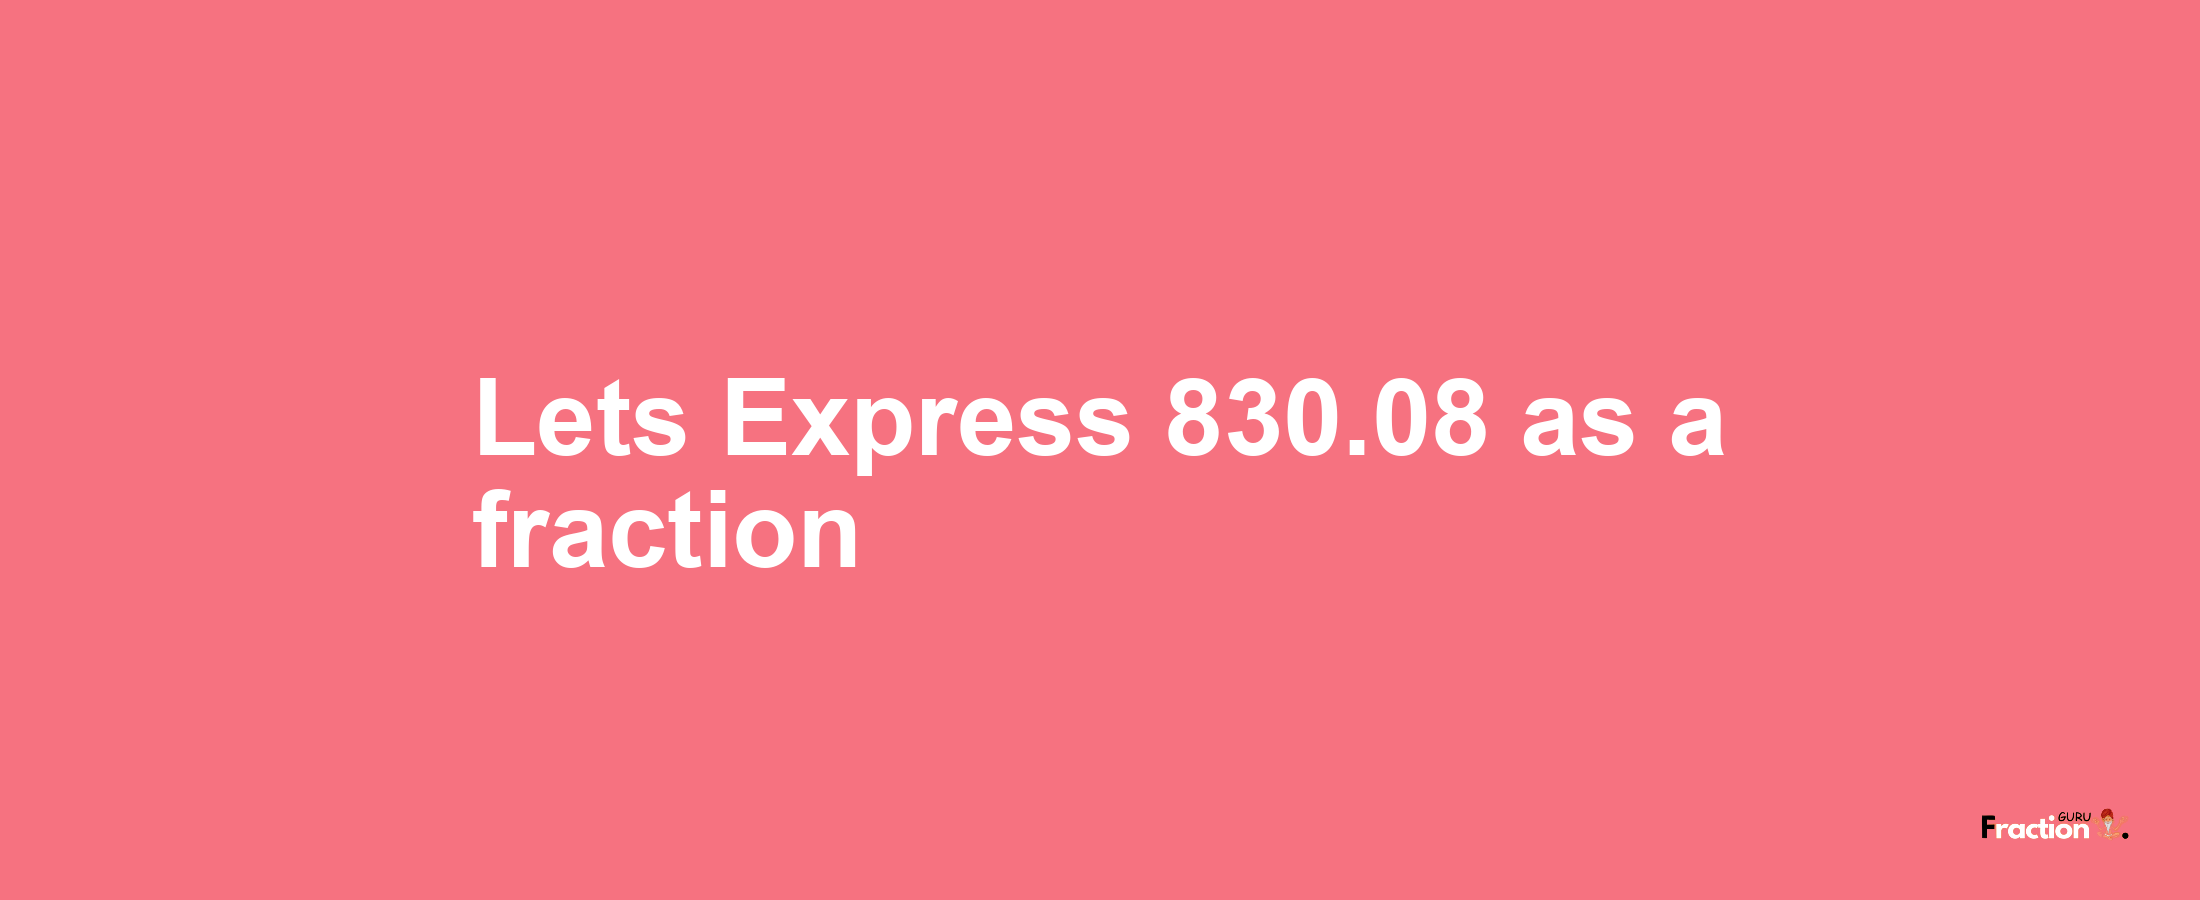 Lets Express 830.08 as afraction